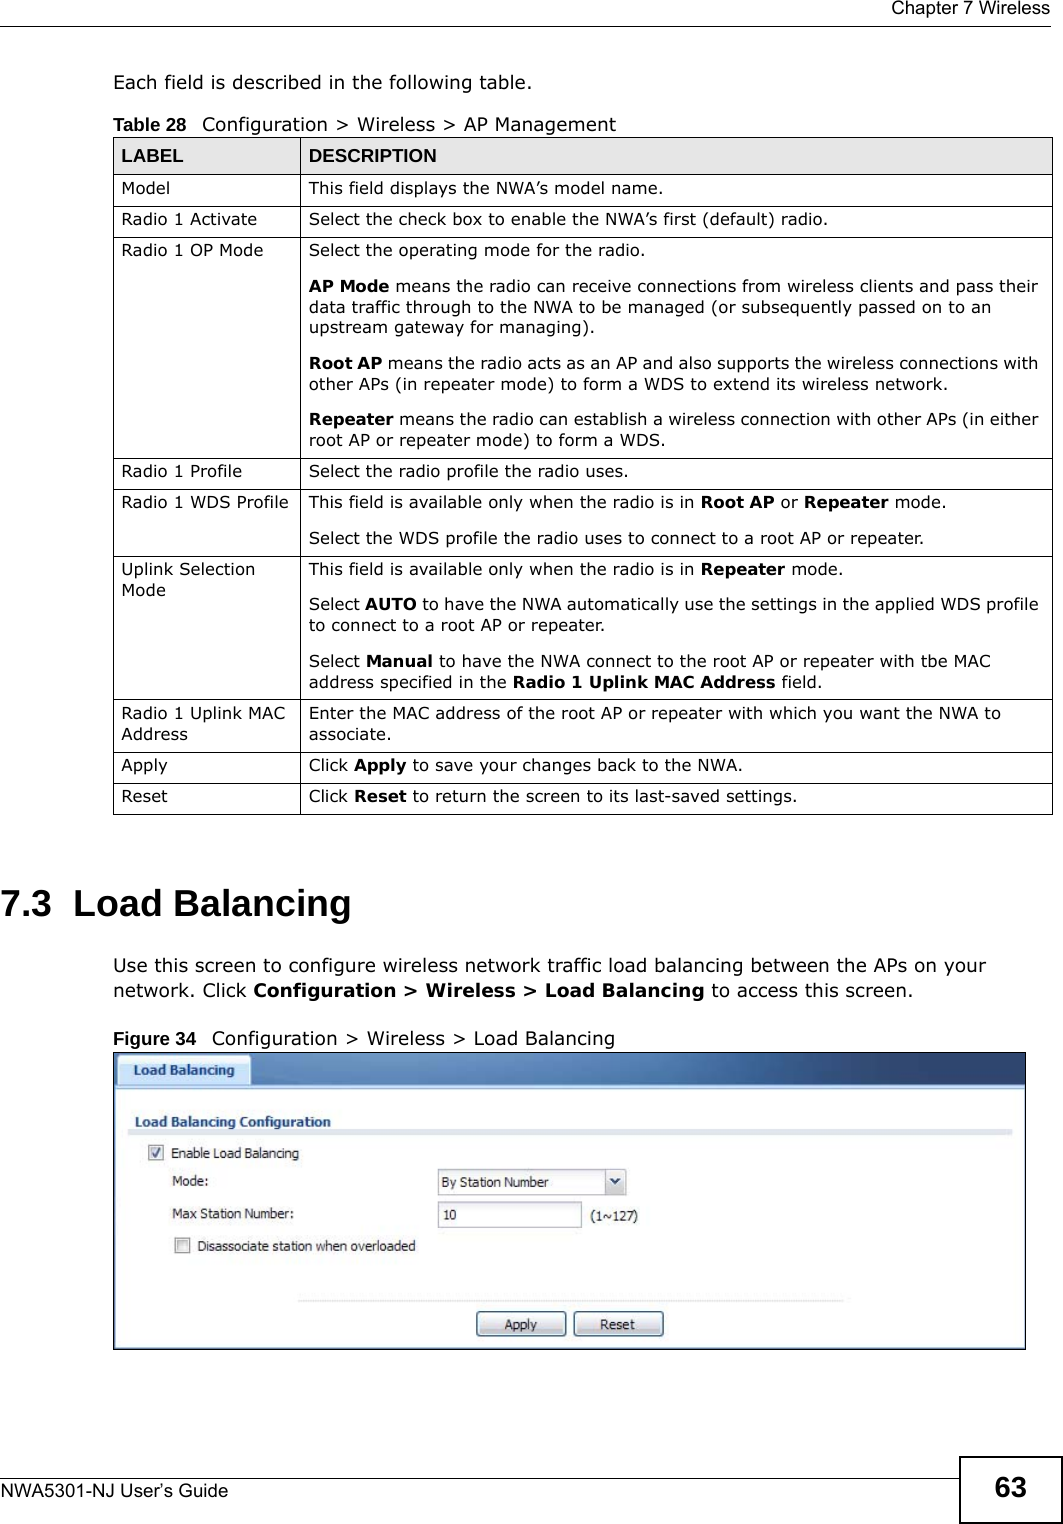  Chapter 7 WirelessNWA5301-NJ User’s Guide 63Each field is described in the following table.  7.3  Load BalancingUse this screen to configure wireless network traffic load balancing between the APs on your network. Click Configuration &gt; Wireless &gt; Load Balancing to access this screen.Figure 34   Configuration &gt; Wireless &gt; Load Balancing      Table 28   Configuration &gt; Wireless &gt; AP ManagementLABEL  DESCRIPTIONModel This field displays the NWA’s model name.Radio 1 Activate Select the check box to enable the NWA’s first (default) radio.Radio 1 OP Mode Select the operating mode for the radio.AP Mode means the radio can receive connections from wireless clients and pass their data traffic through to the NWA to be managed (or subsequently passed on to an upstream gateway for managing).Root AP means the radio acts as an AP and also supports the wireless connections with other APs (in repeater mode) to form a WDS to extend its wireless network.Repeater means the radio can establish a wireless connection with other APs (in either root AP or repeater mode) to form a WDS.Radio 1 Profile Select the radio profile the radio uses. Radio 1 WDS Profile This field is available only when the radio is in Root AP or Repeater mode.Select the WDS profile the radio uses to connect to a root AP or repeater.Uplink Selection ModeThis field is available only when the radio is in Repeater mode.Select AUTO to have the NWA automatically use the settings in the applied WDS profile to connect to a root AP or repeater.Select Manual to have the NWA connect to the root AP or repeater with tbe MAC address specified in the Radio 1 Uplink MAC Address field.Radio 1 Uplink MAC AddressEnter the MAC address of the root AP or repeater with which you want the NWA to associate.Apply Click Apply to save your changes back to the NWA.Reset Click Reset to return the screen to its last-saved settings. 